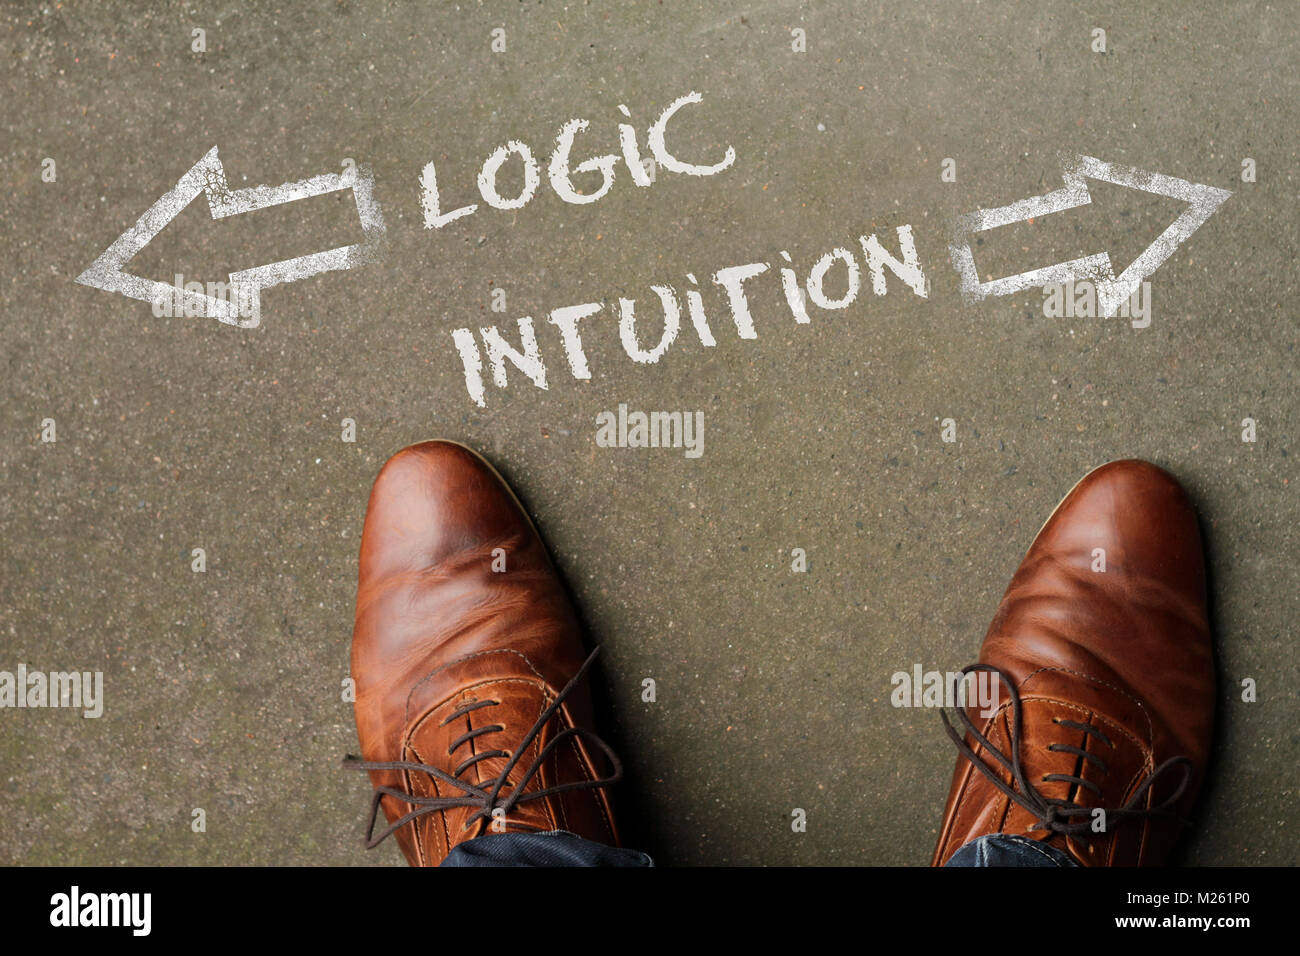 Decision time: Logic or Intuition? Stock Photo